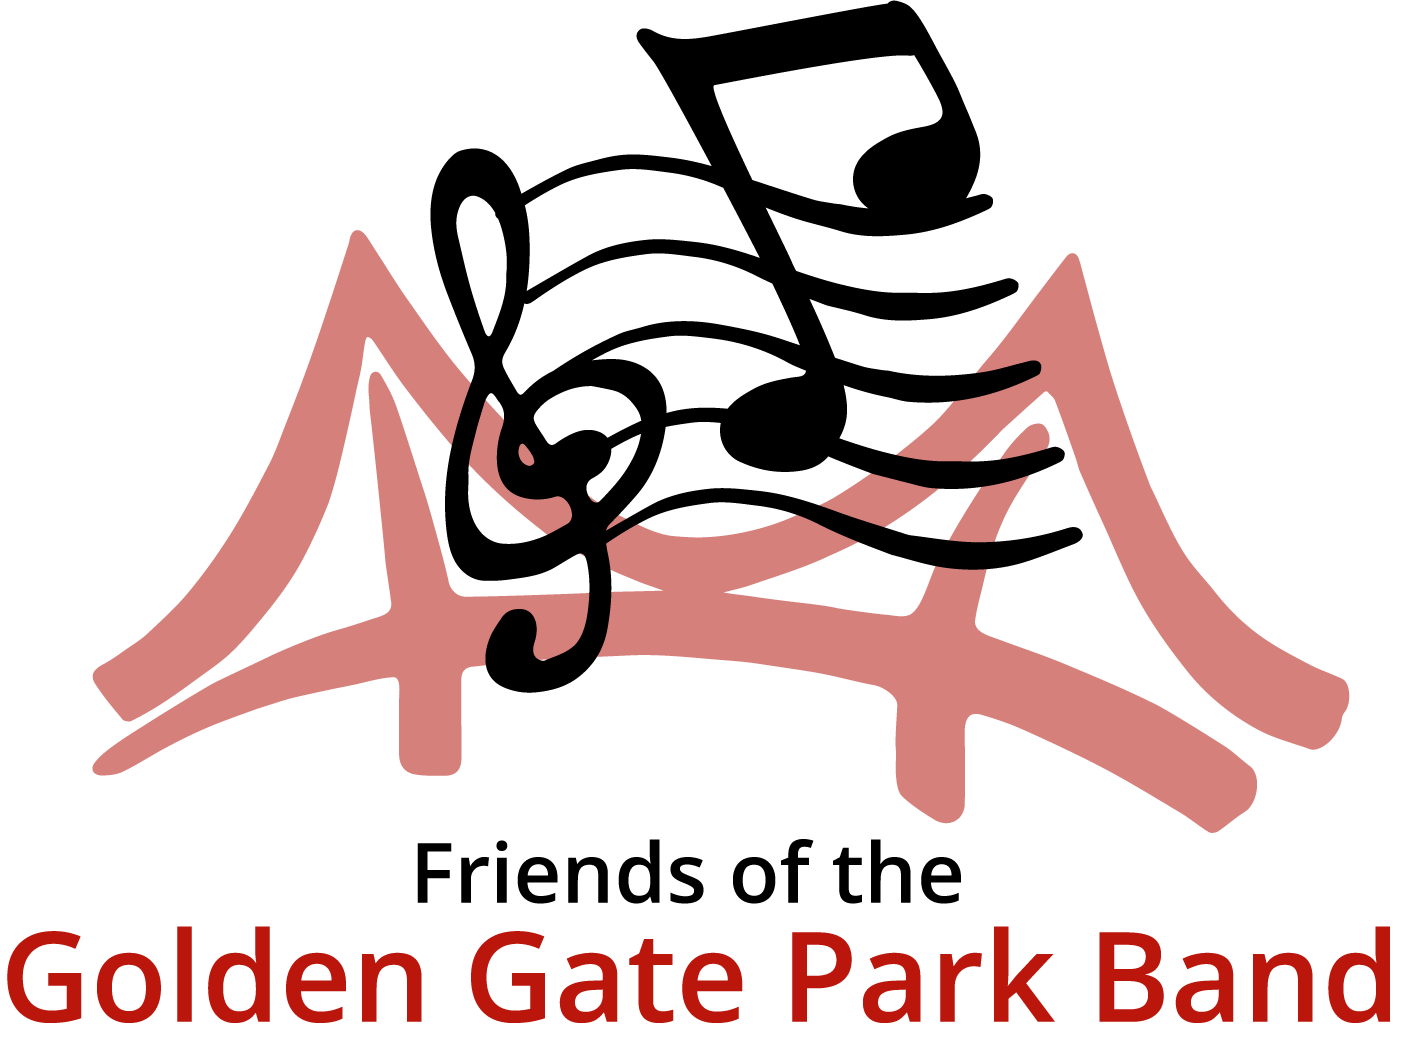 Friends of the Golden Gate Park Band